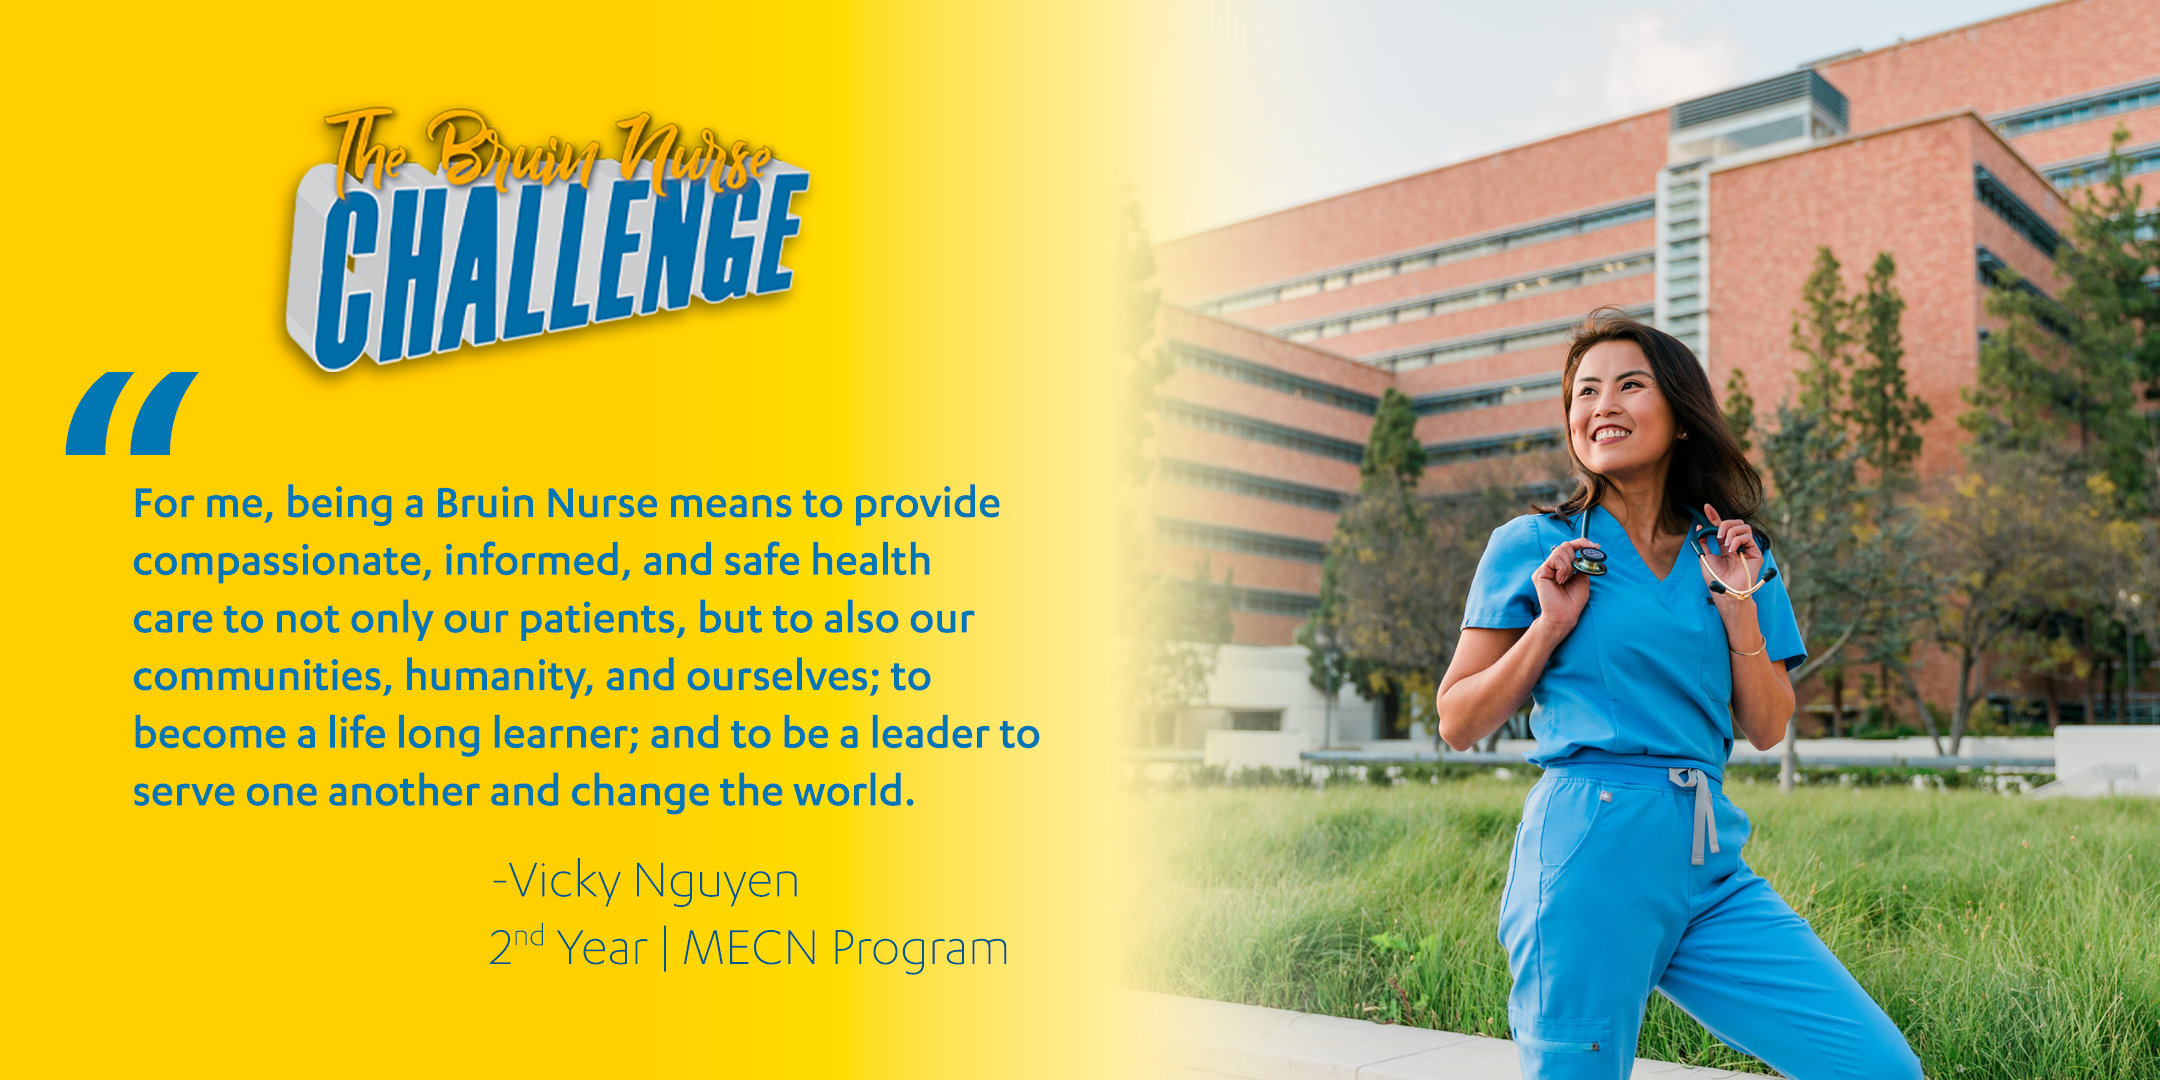 Bruin Nurse Challenge graphic featuring Vicky Nguyen's quote, "For me, being a Bruin Nurse means to provide compassionate, informed, and safe health care to not only our patients, but to also our communities, humanity, and ourselves; to become a life long learner; and to be a leader to serve one another and change the world."